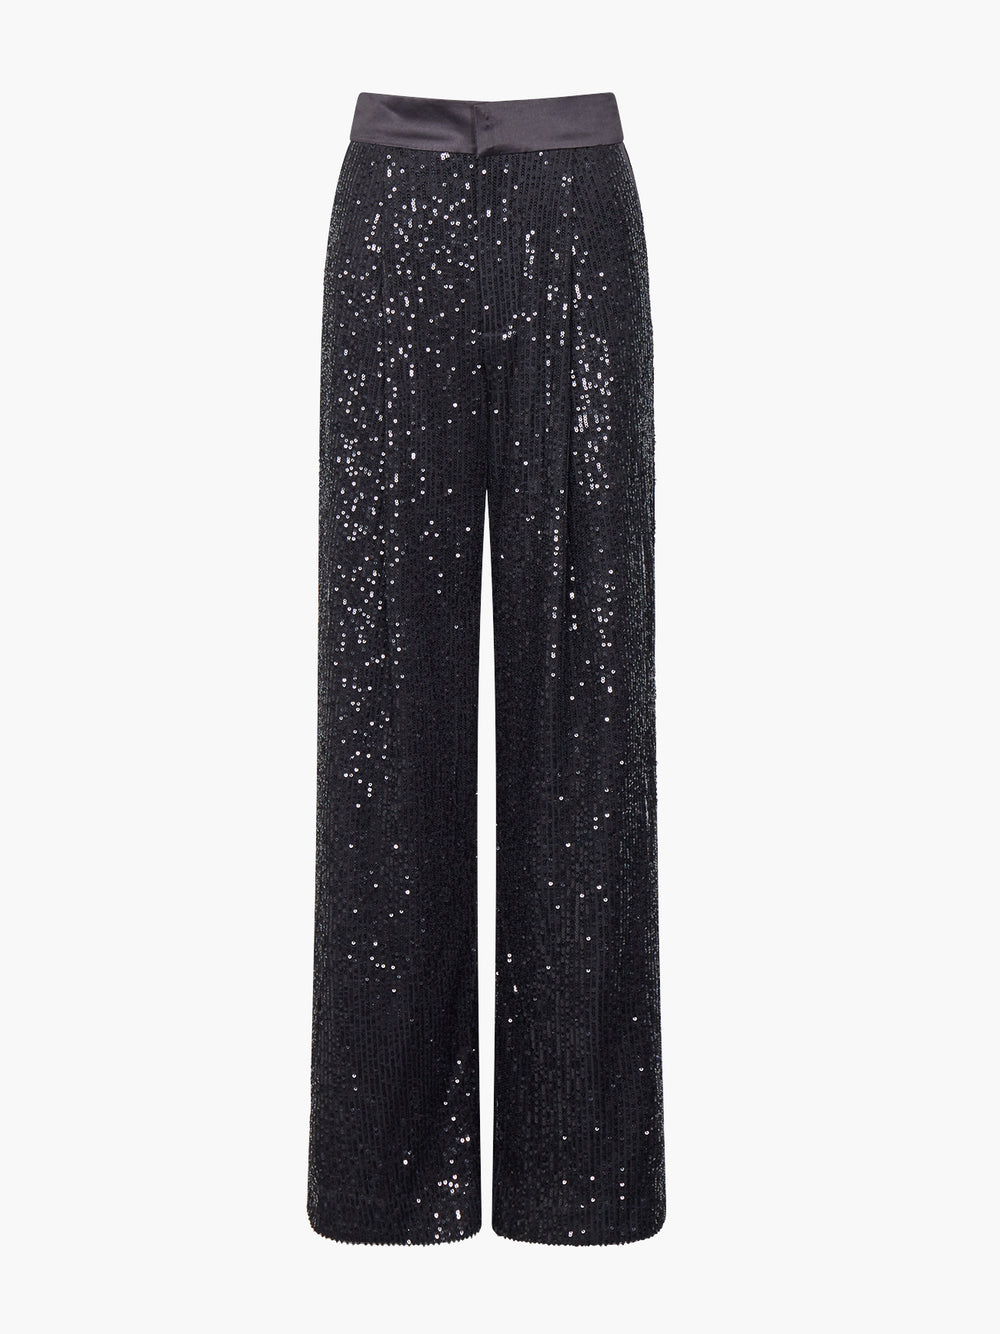 River Island Petite coord sequin flare trouser in black  ASOS